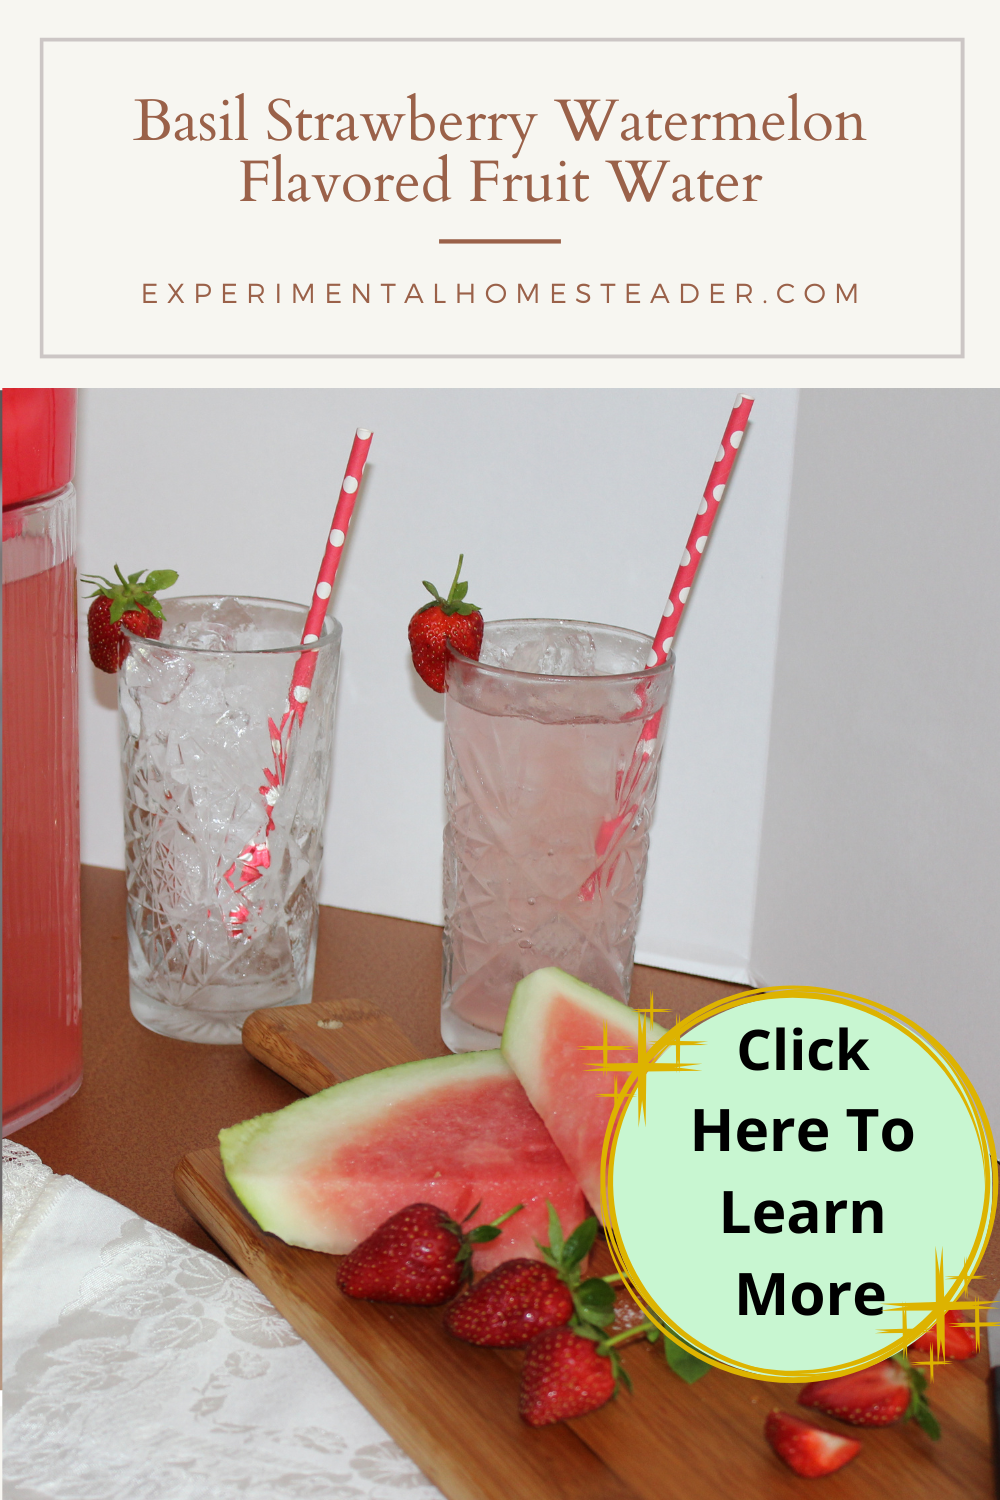 Strawberries, watermelon and basil on a cutting board with a pitcher of fruit infused water and two glasses behind. One glass is filled with ice and some of the fruit flavored water. The other glass is filled with ice.